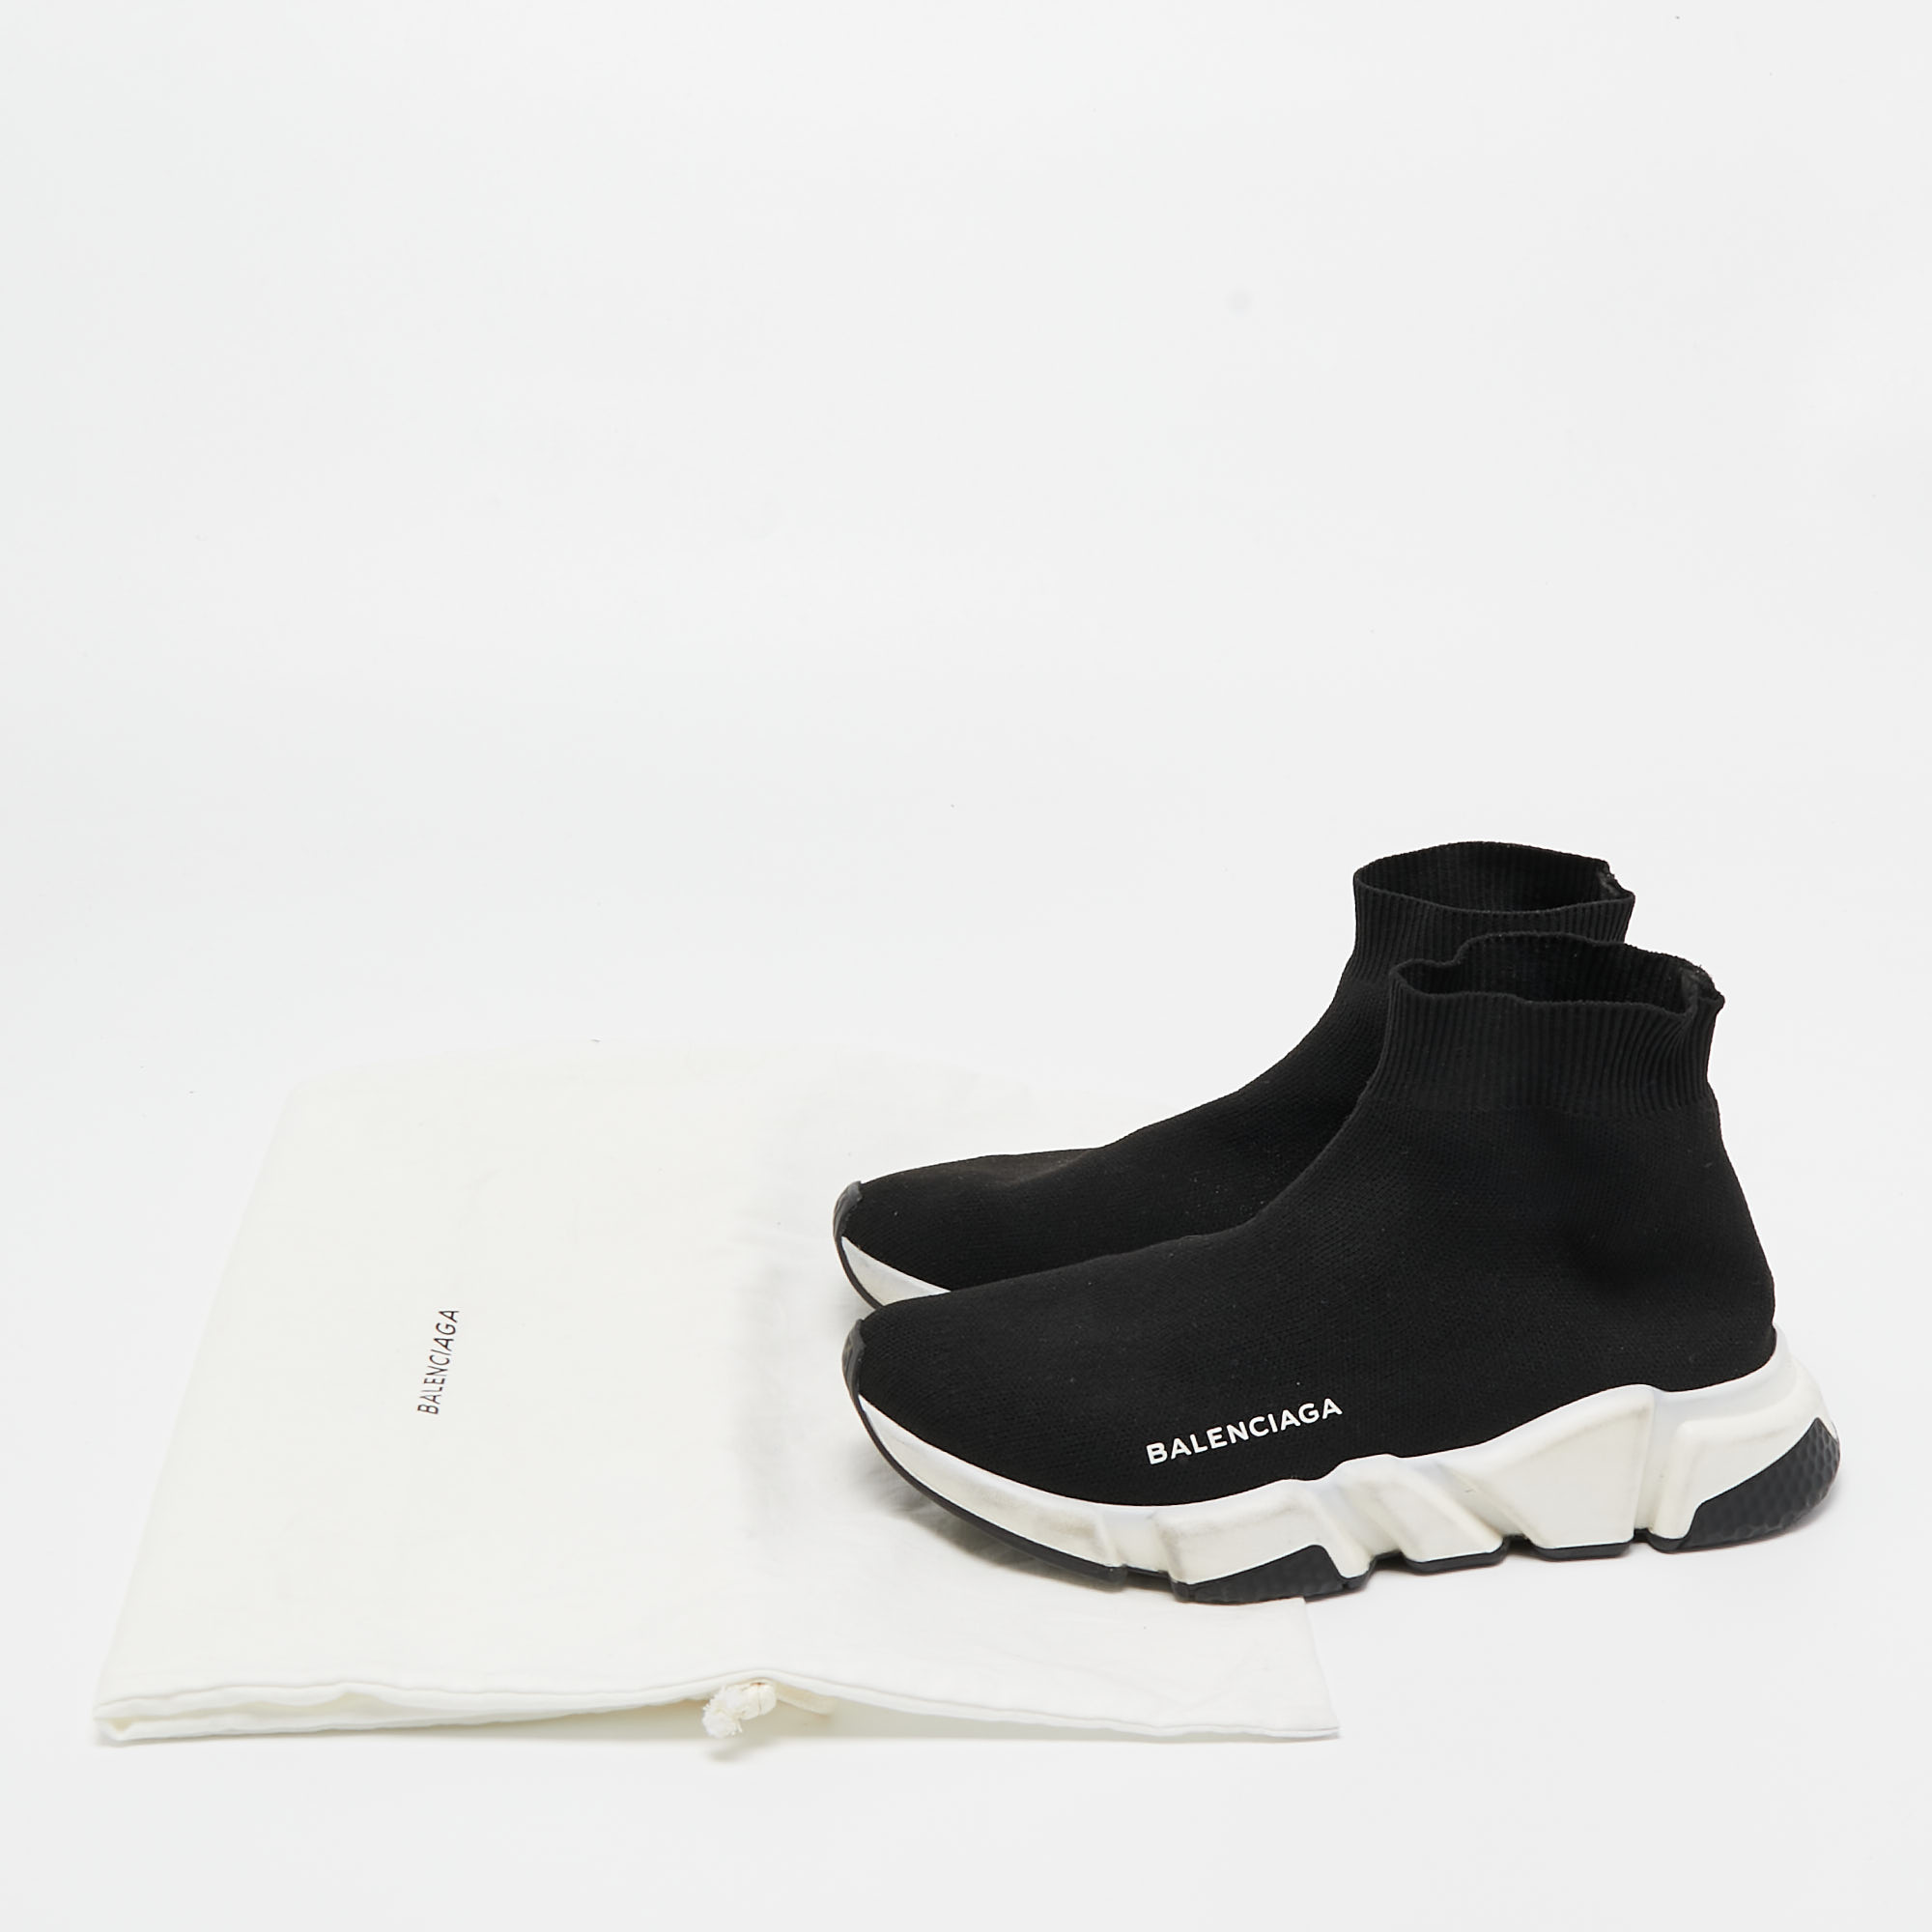 Balenciaga Black Knit Speed Trainer  Sneakers Size 37